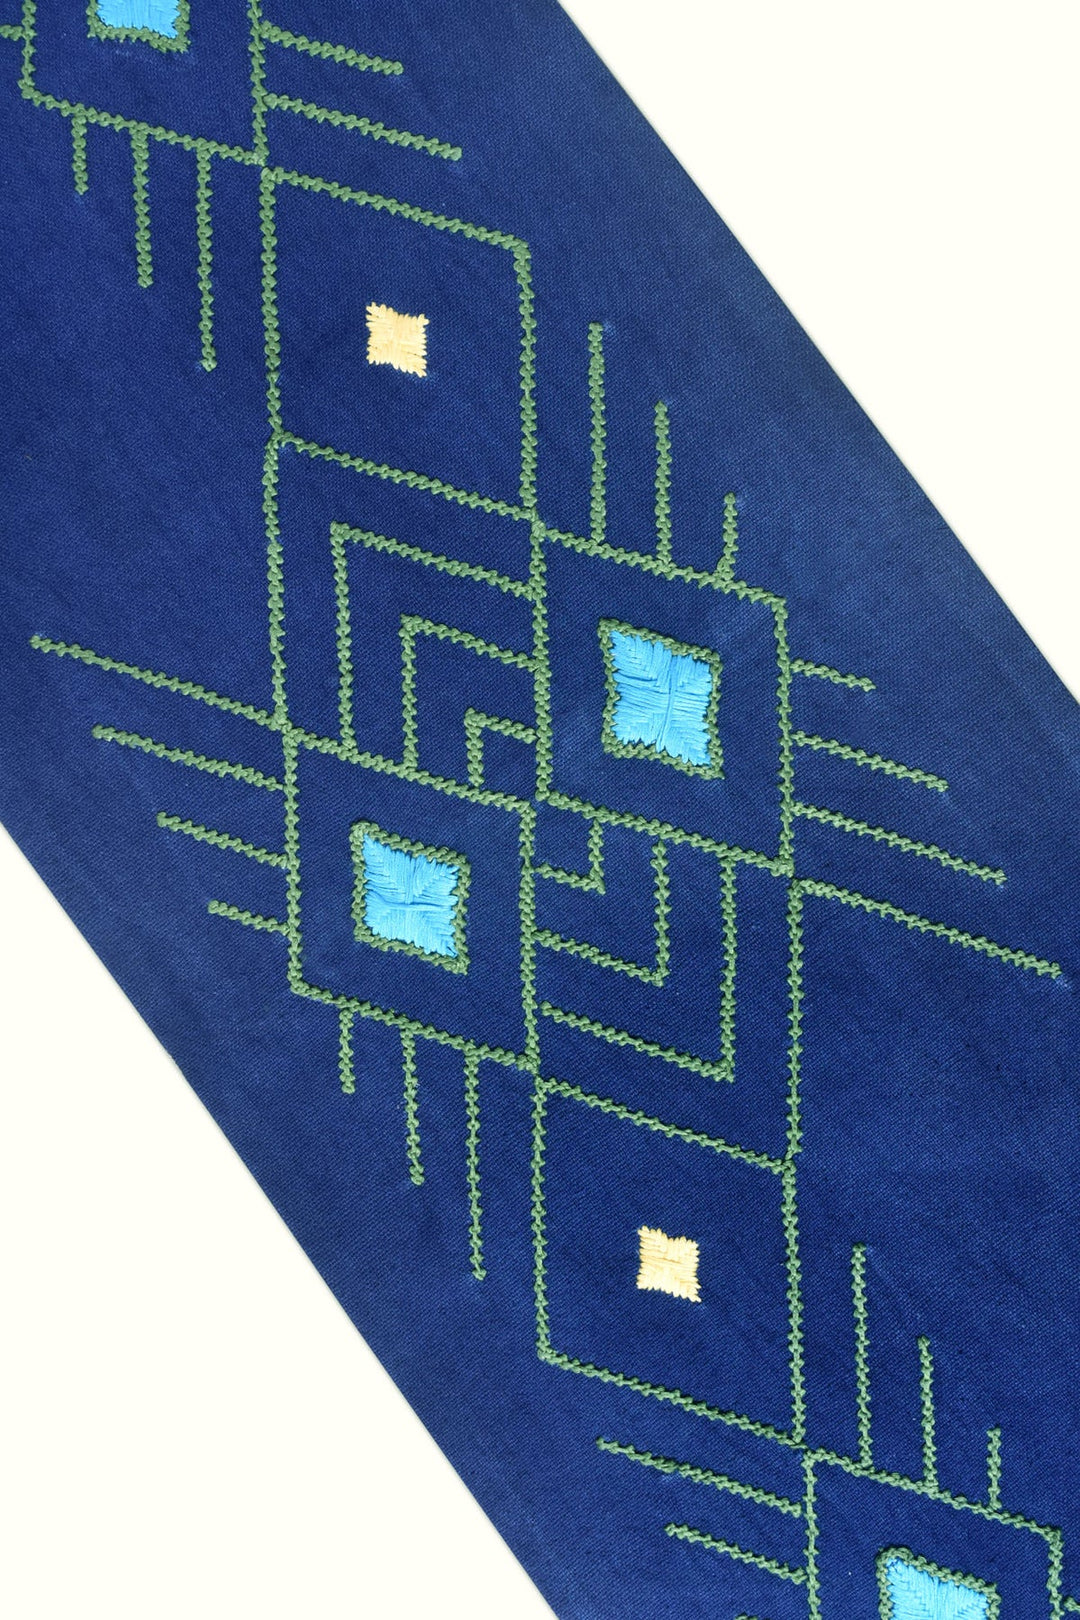 Blue Cotton Table Runner with African-Aztec Embroidery | Cicero - Handwoven Table Runner - Blue